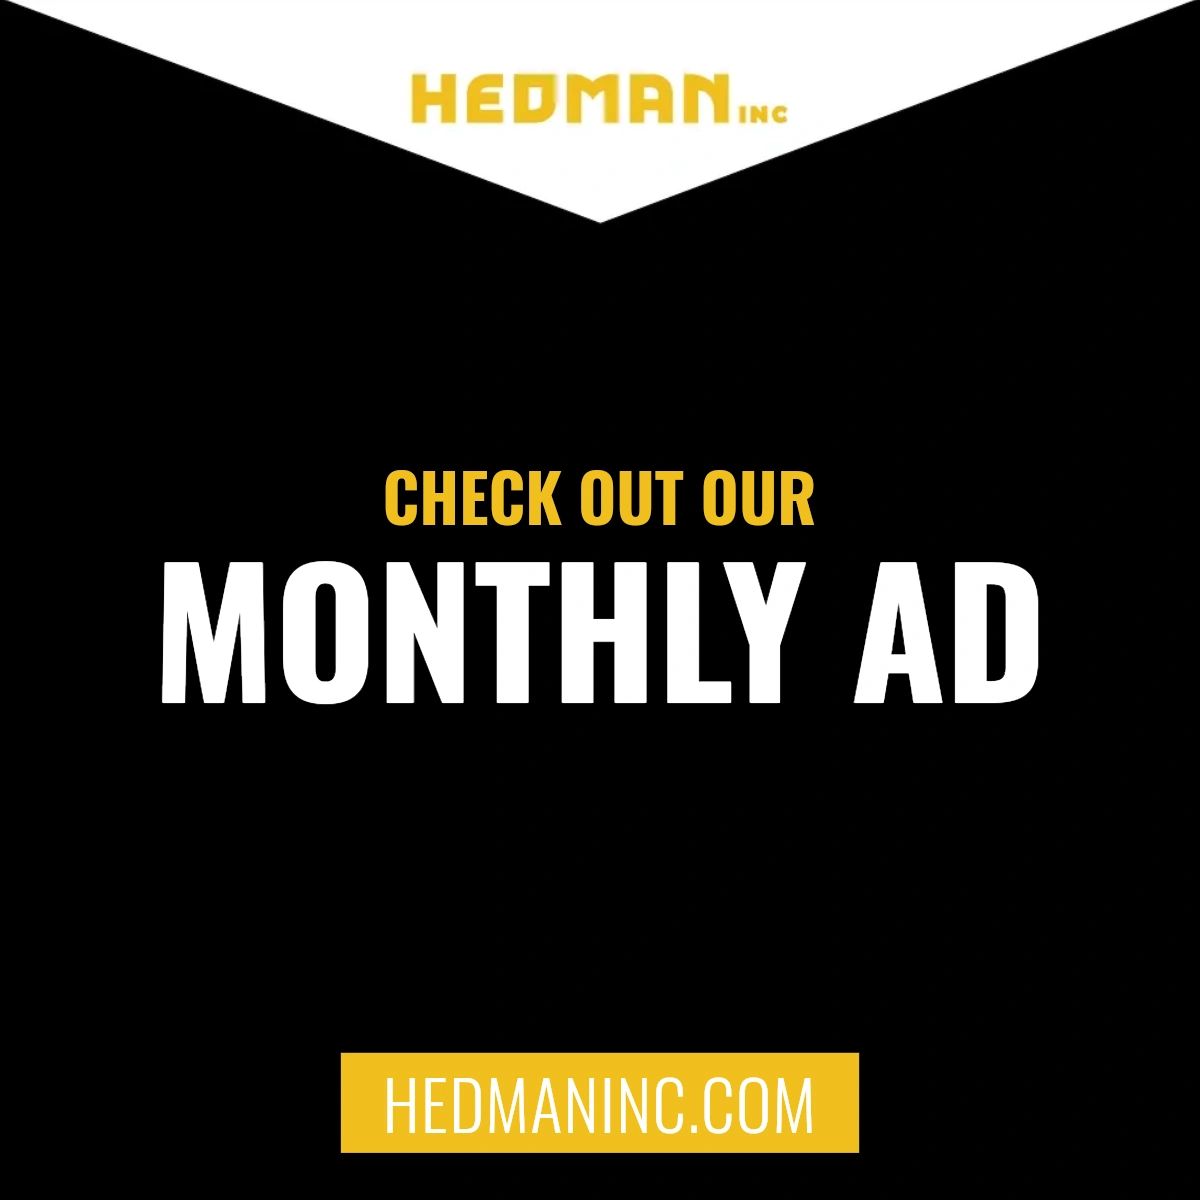 A new month means new savings! Head to hedmaninc.com to check out our March ad and reach out to let us know what you need.

#RanchEquipment #AgSupplies #FenceSupplies #HedmanInc